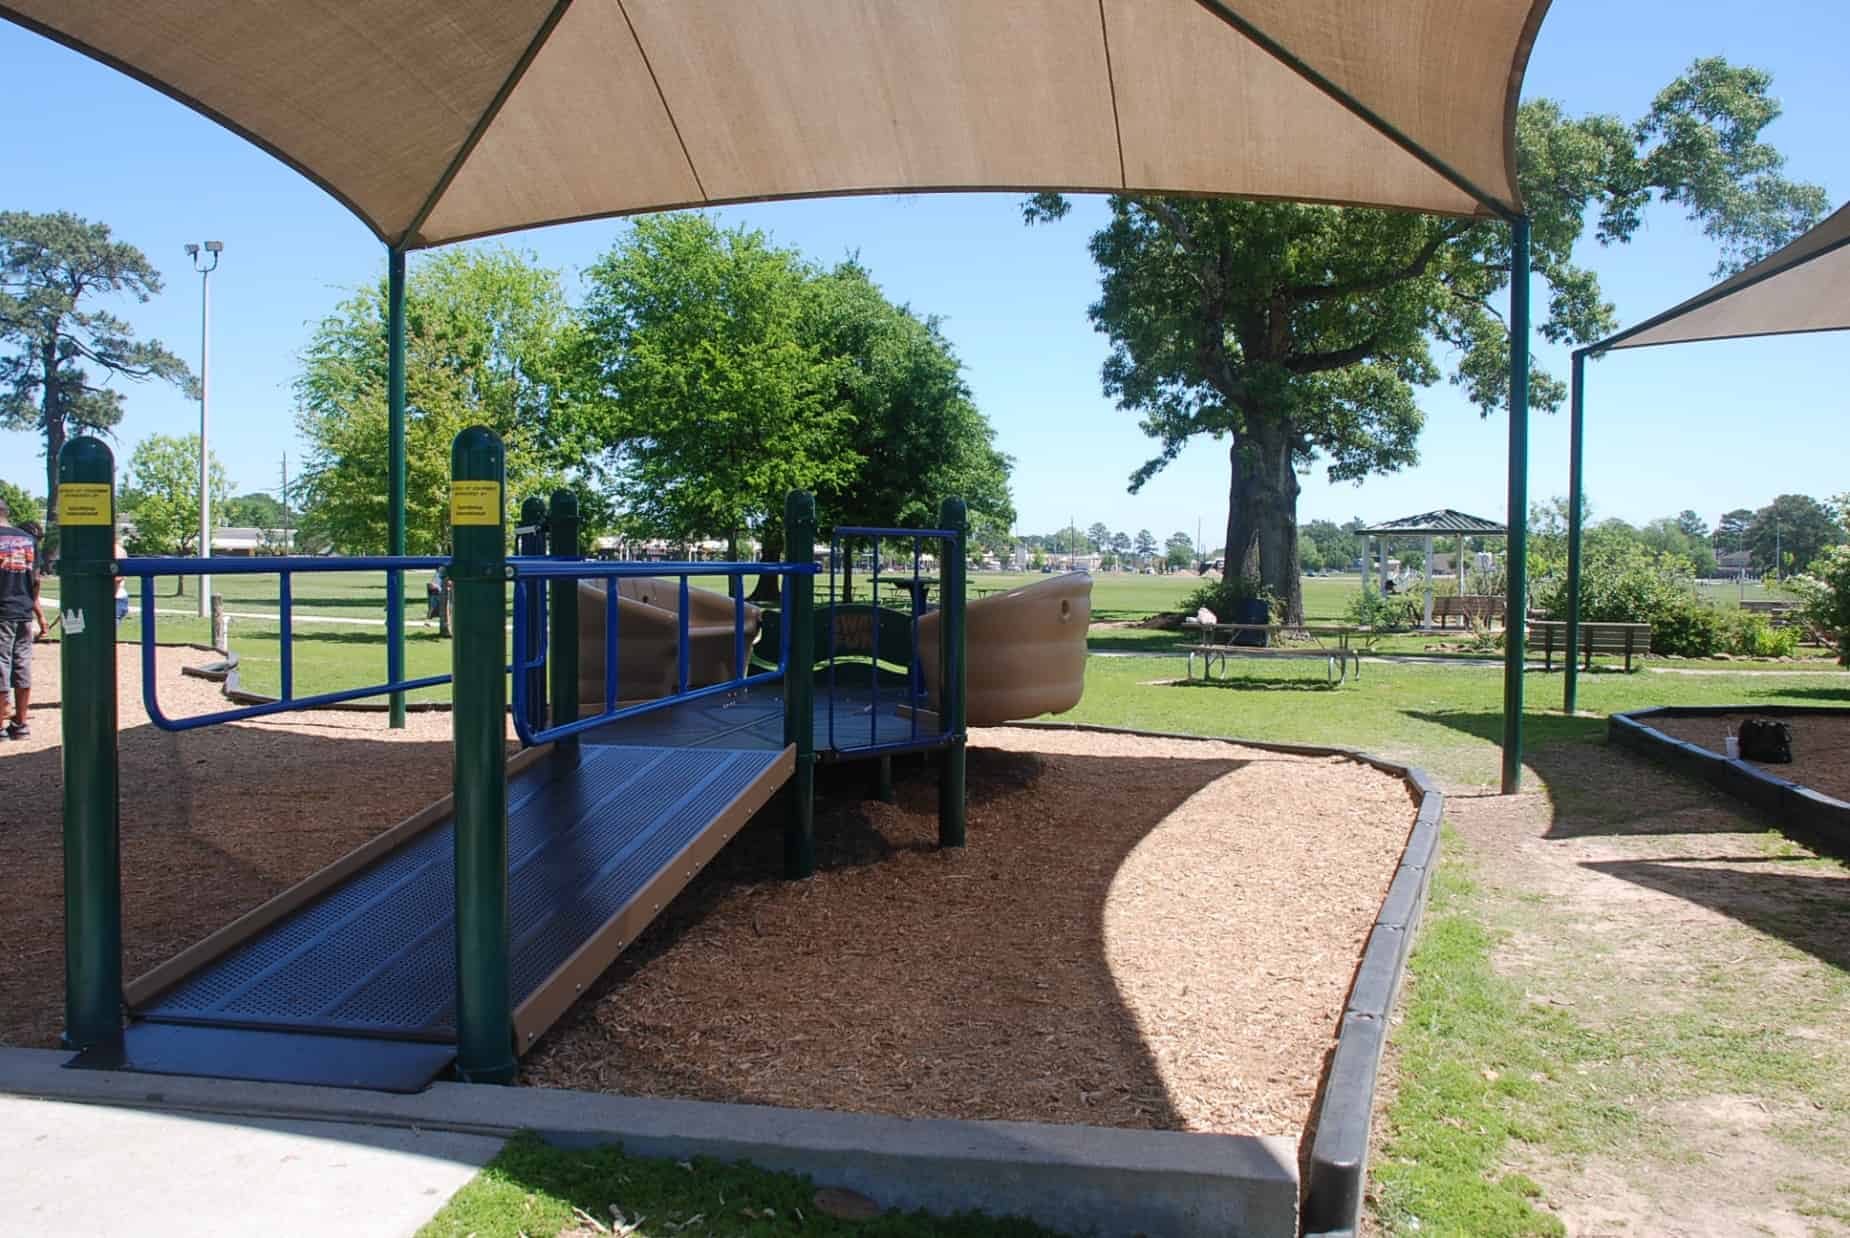 Matzke Park covered playground area for special needs children in Houston TX